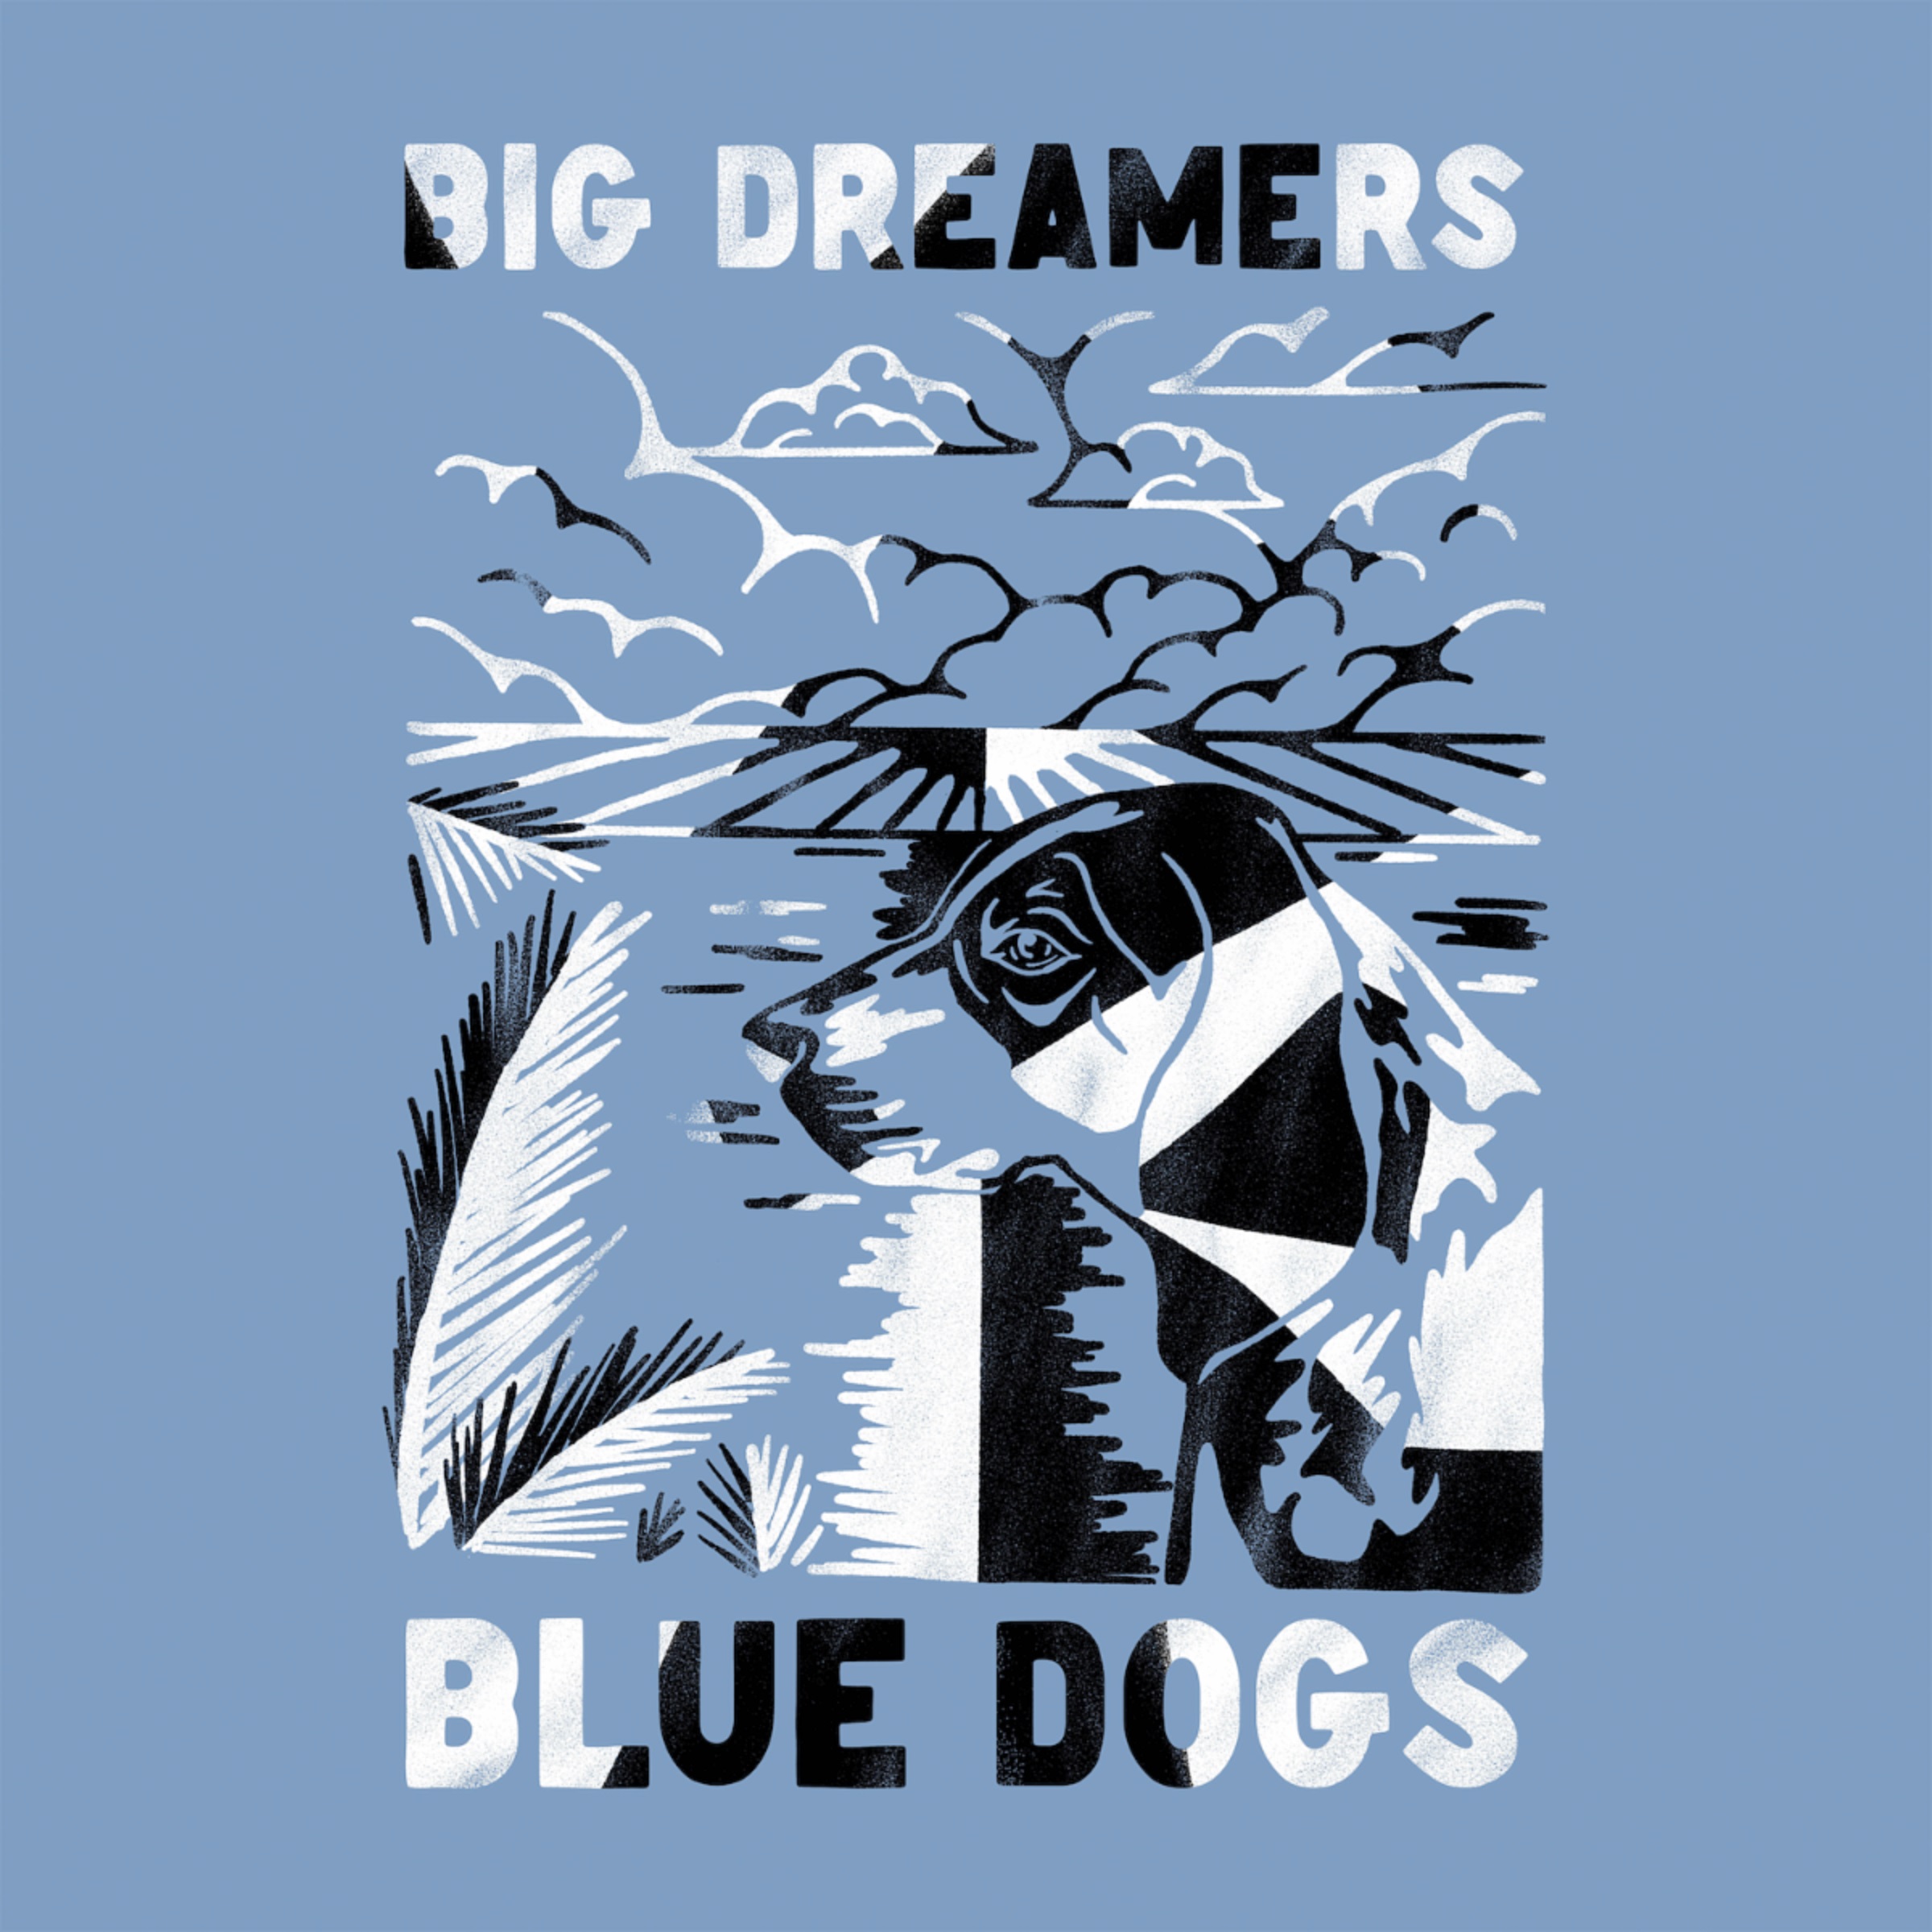 Blue Dogs Are Back With New Sadler Vaden-Produced Album Big Dreamers